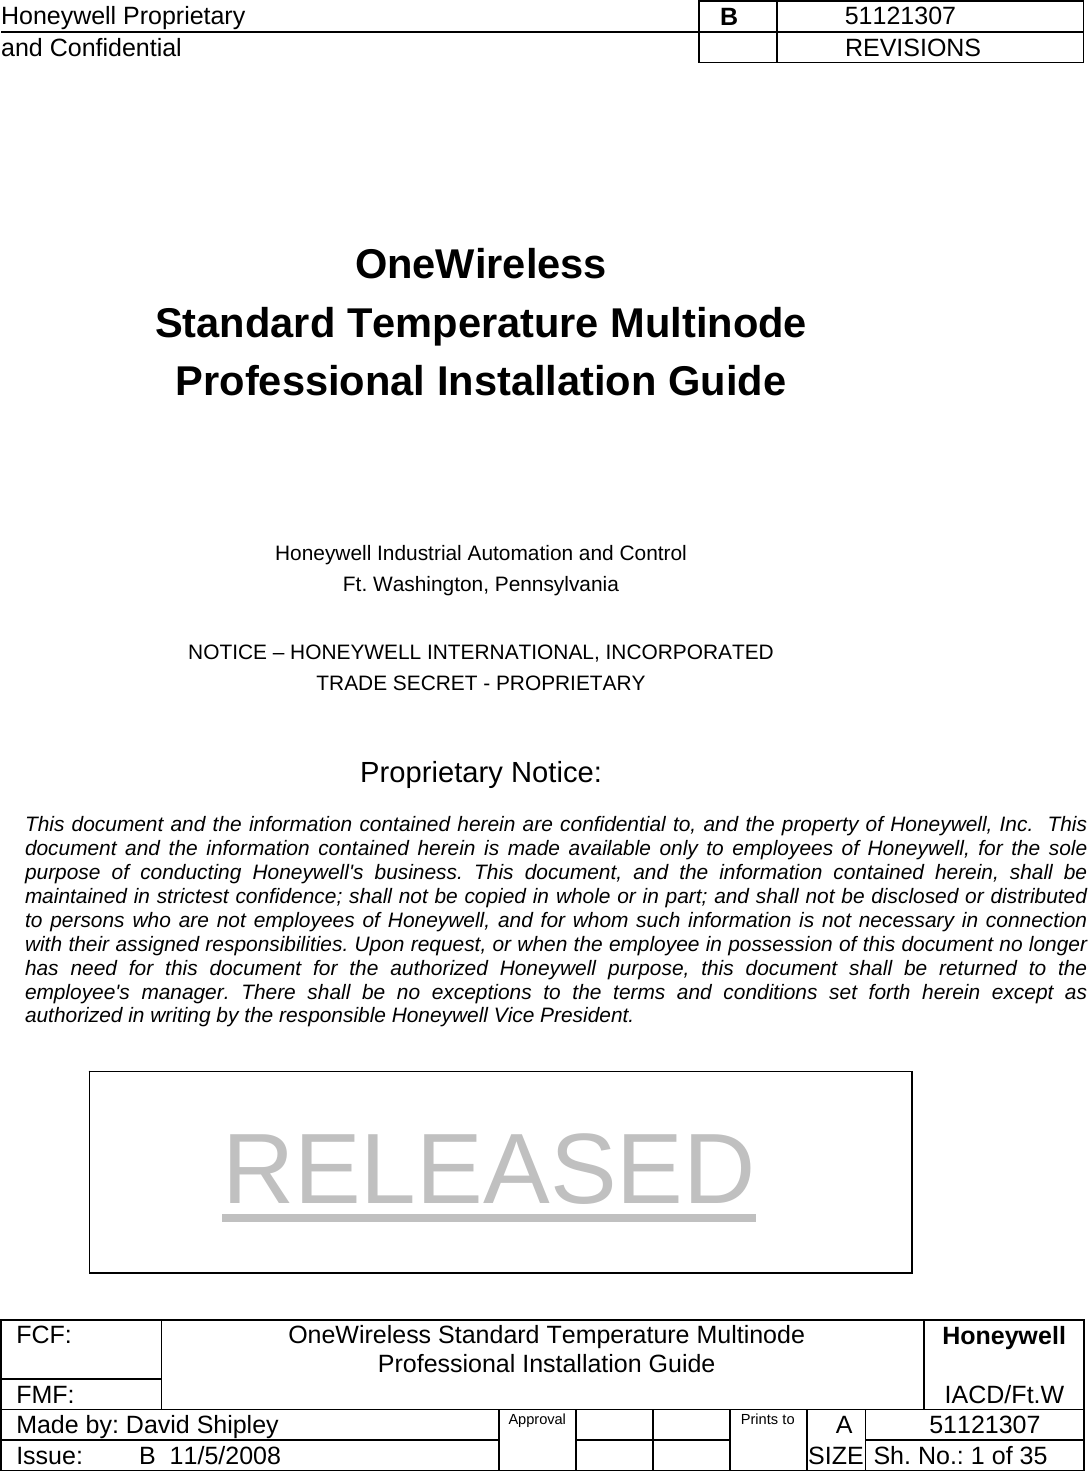 Honeywell Proprietary    B         51121307 and Confidential             REVISIONS  FCF: OneWireless Standard Temperature Multinode  Professional Installation Guide  Honeywell FMF:               IACD/Ft.W Made by: David Shipley  Approval   Prints to     A           51121307 Issue:        B  11/5/2008          SIZE  Sh. No.: 1 of 35      OneWireless  Standard Temperature Multinode  Professional Installation Guide      Honeywell Industrial Automation and Control Ft. Washington, Pennsylvania  NOTICE – HONEYWELL INTERNATIONAL, INCORPORATED TRADE SECRET - PROPRIETARY   Proprietary Notice:  This document and the information contained herein are confidential to, and the property of Honeywell, Inc.  This document and the information contained herein is made available only to employees of Honeywell, for the sole purpose of conducting Honeywell&apos;s business. This document, and the information contained herein, shall be maintained in strictest confidence; shall not be copied in whole or in part; and shall not be disclosed or distributed to persons who are not employees of Honeywell, and for whom such information is not necessary in connection with their assigned responsibilities. Upon request, or when the employee in possession of this document no longer has need for this document for the authorized Honeywell purpose, this document shall be returned to the employee&apos;s manager. There shall be no exceptions to the terms and conditions set forth herein except as authorized in writing by the responsible Honeywell Vice President. RELEASED 